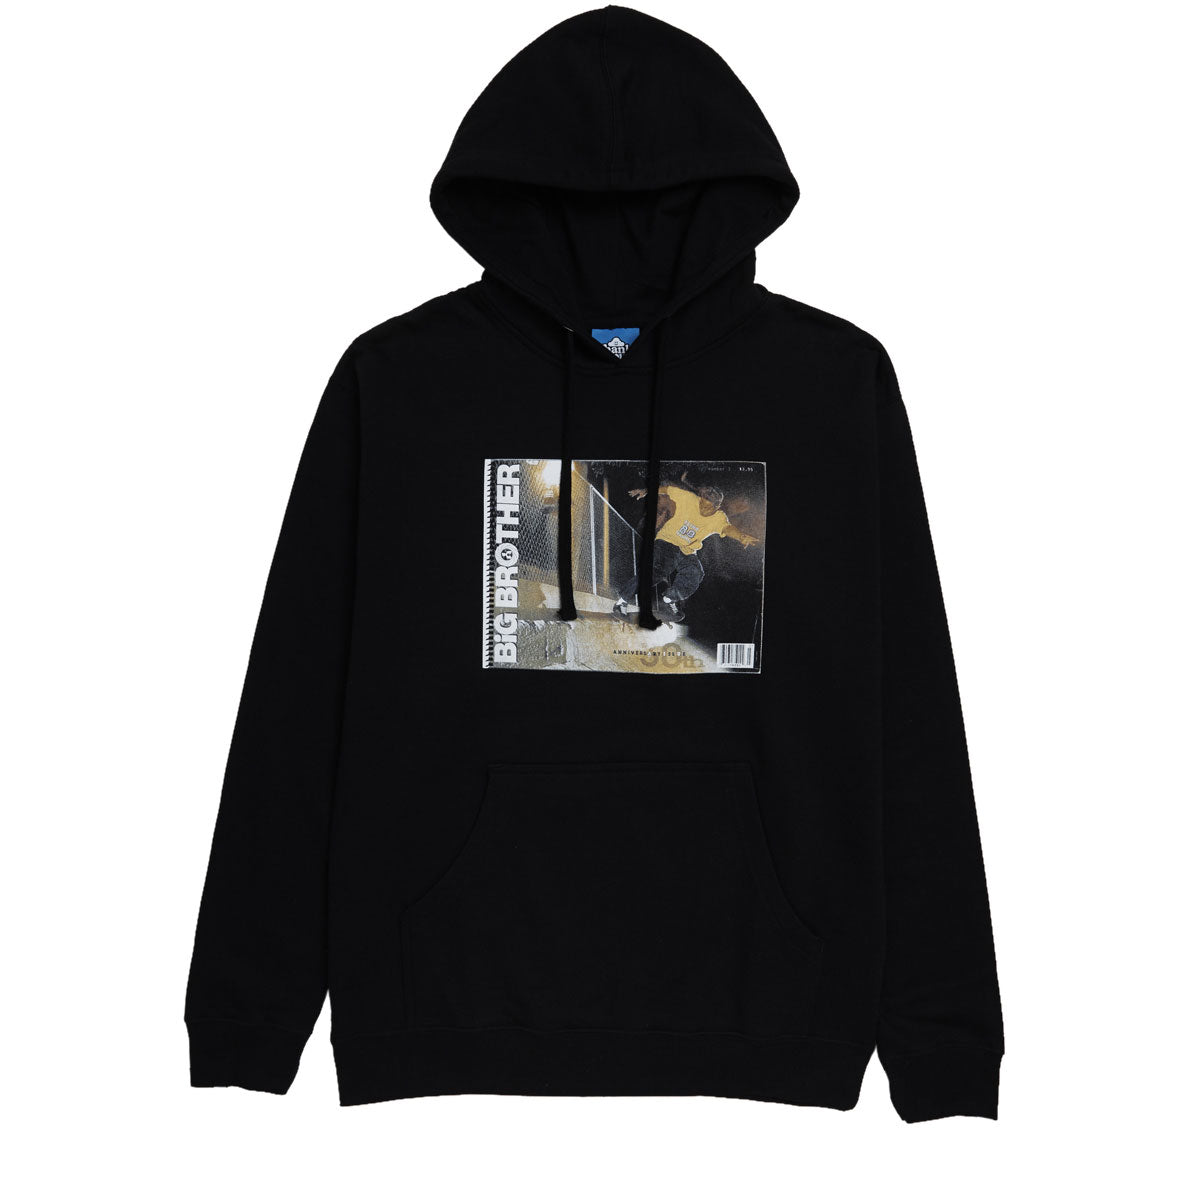 Thank You Anniversary Cover Hoodie - Black image 1